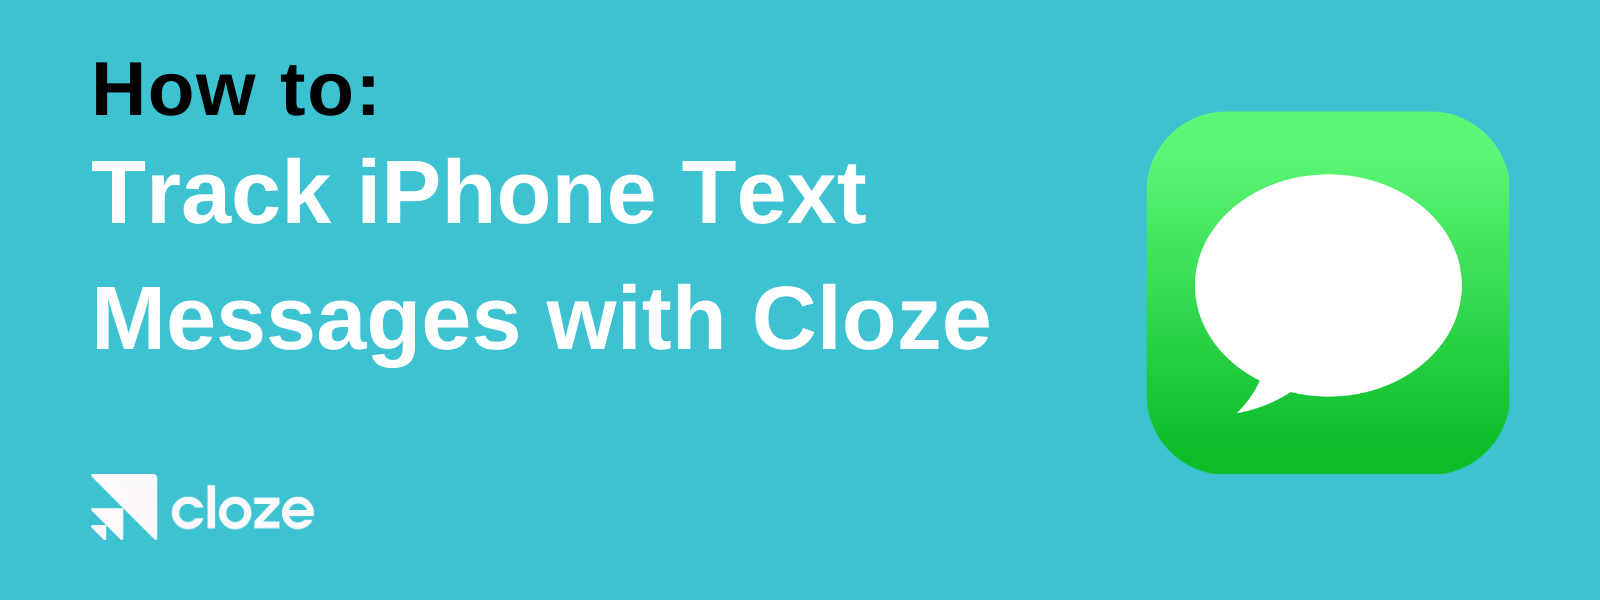 How to track iPhone text messages with Cloze.